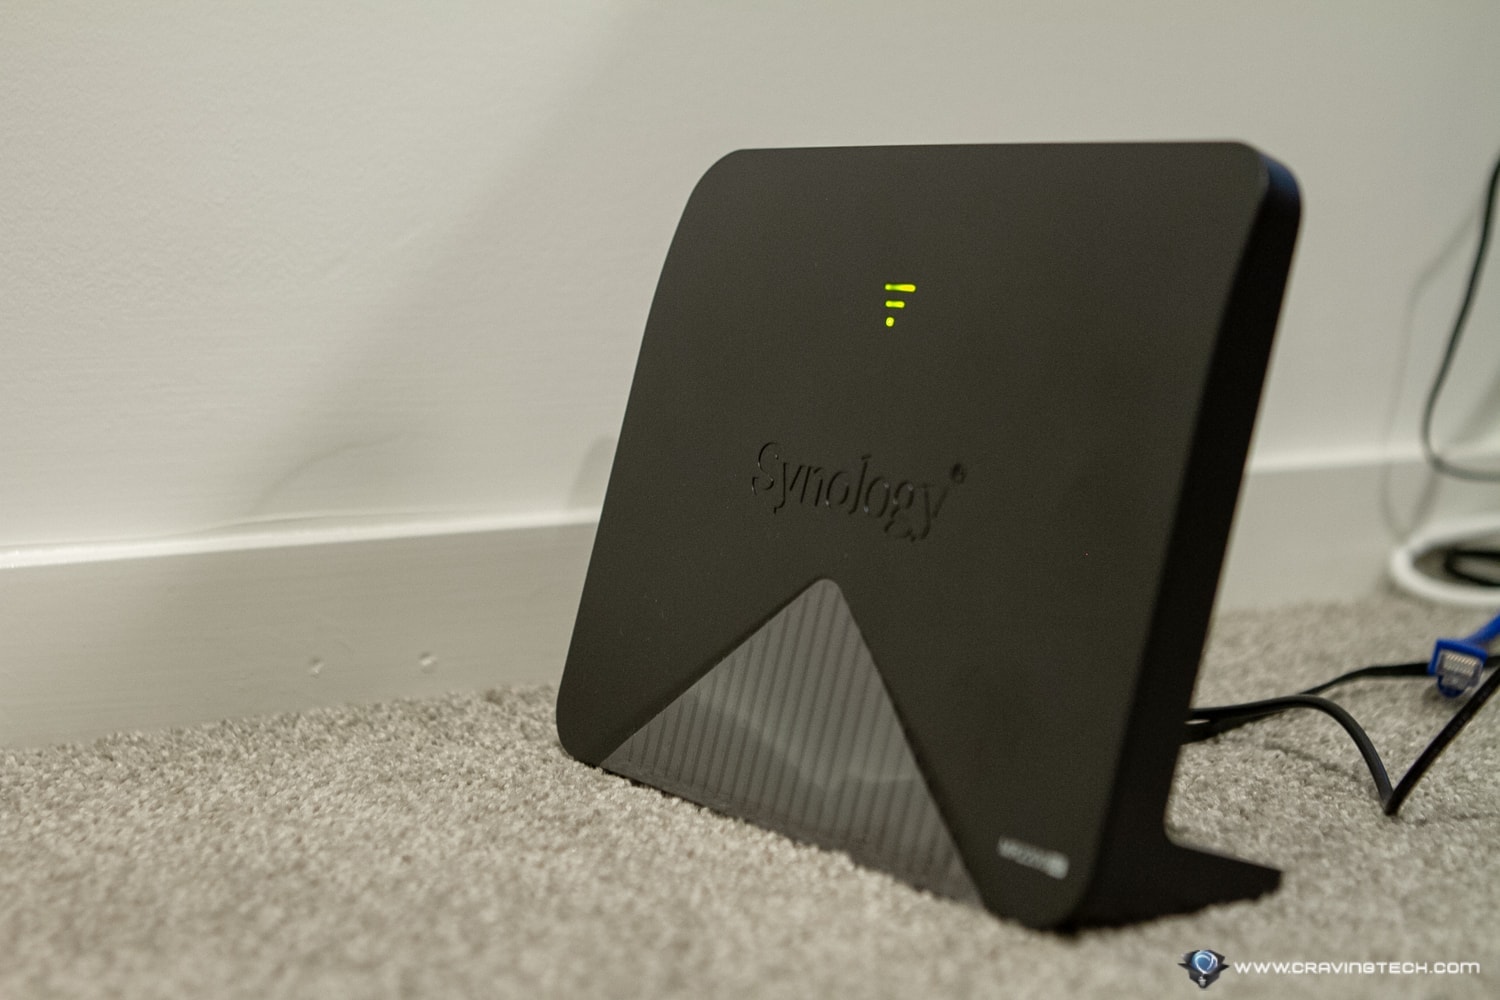 Synology-MR2200ac-Review-7-of-7